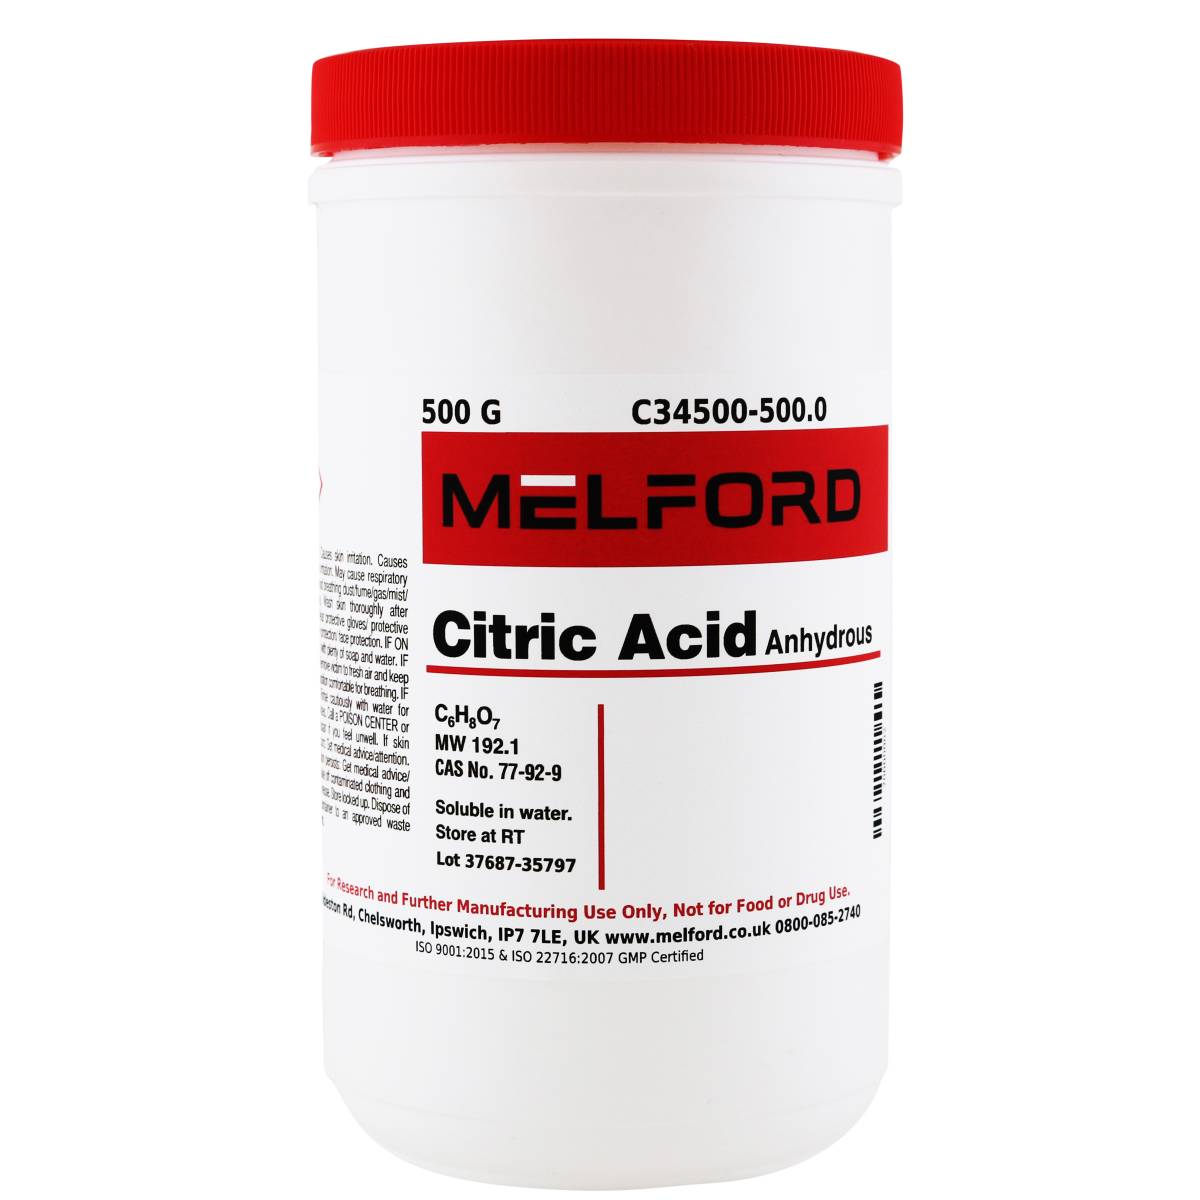 Citric Acid Anhydrous, 500 Grams